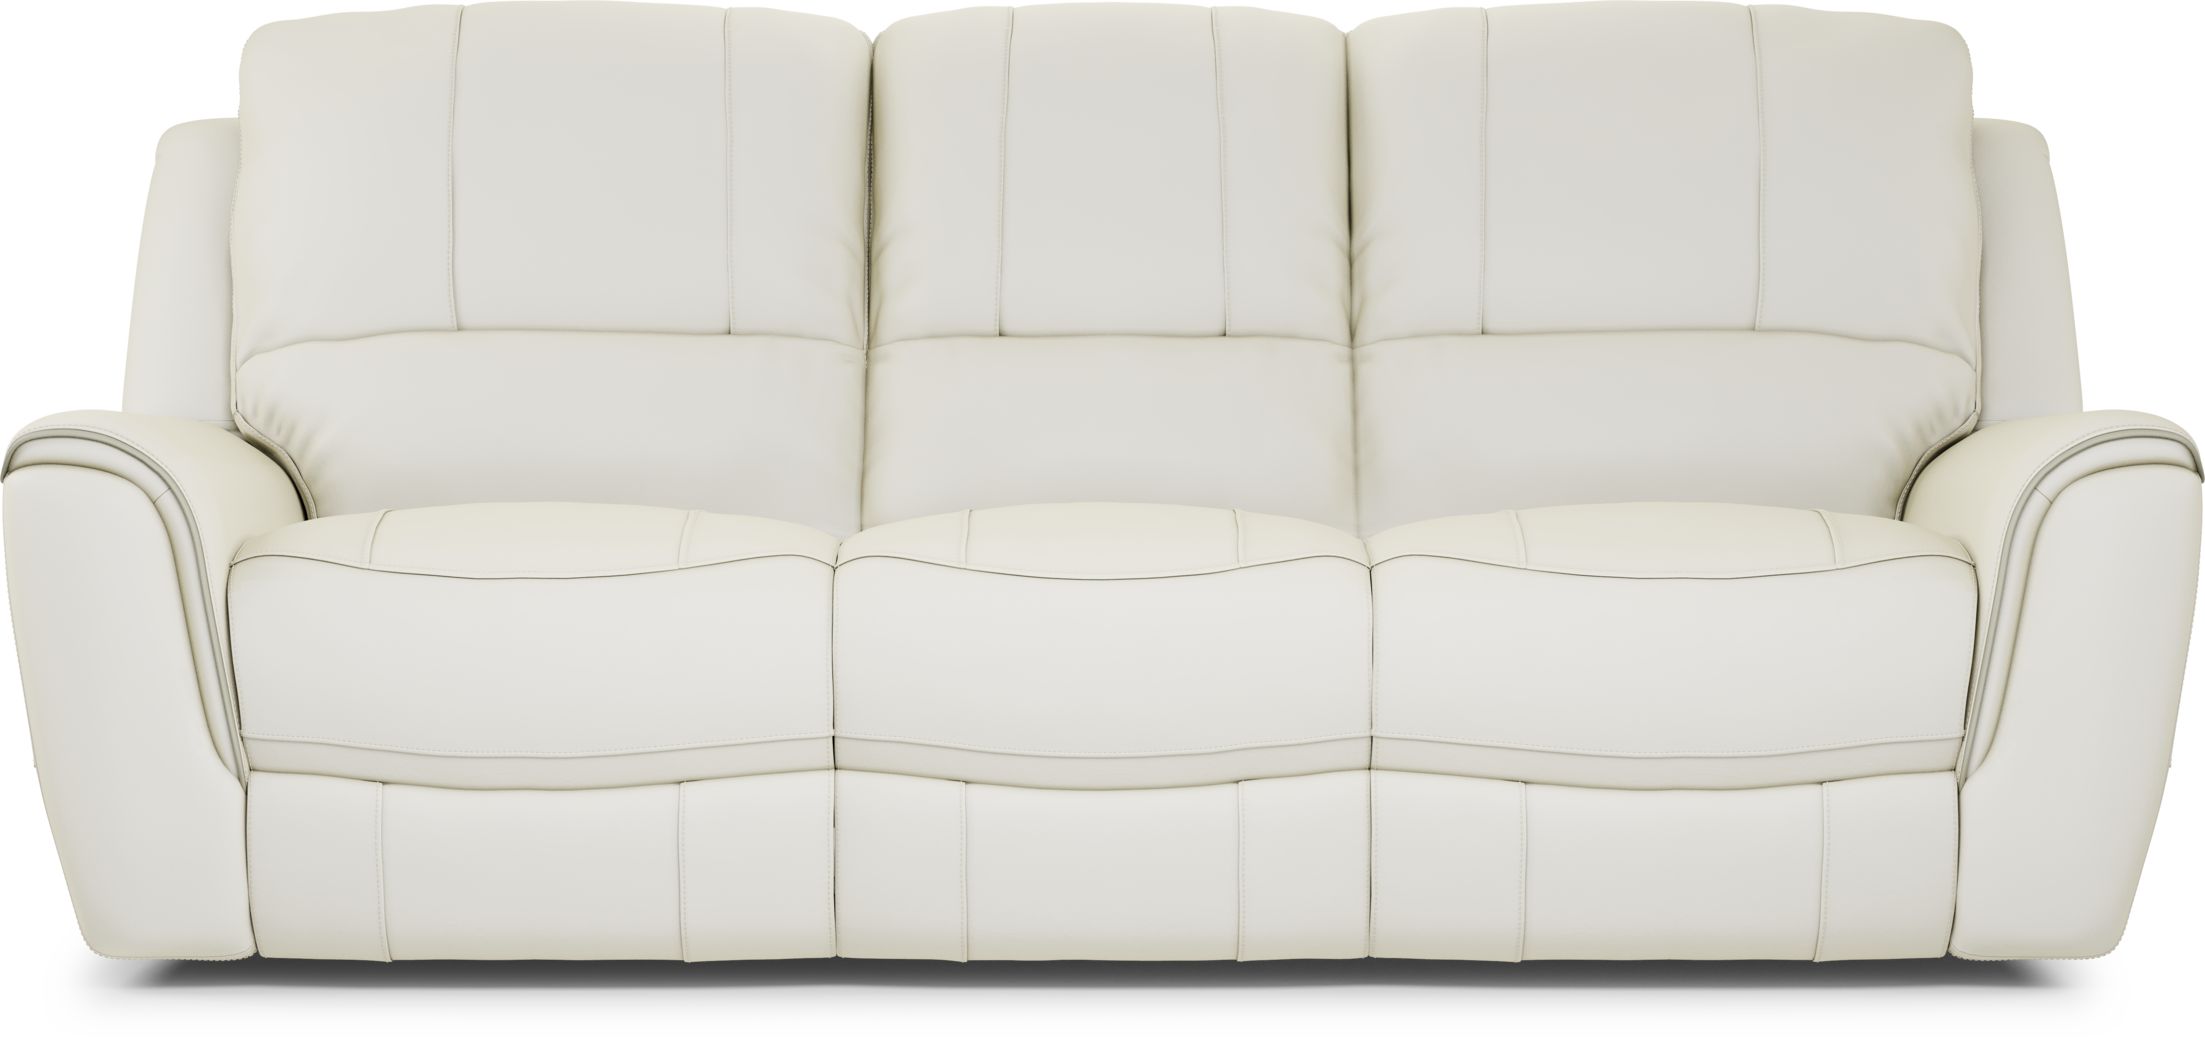 white leather reclining sofa slip covers